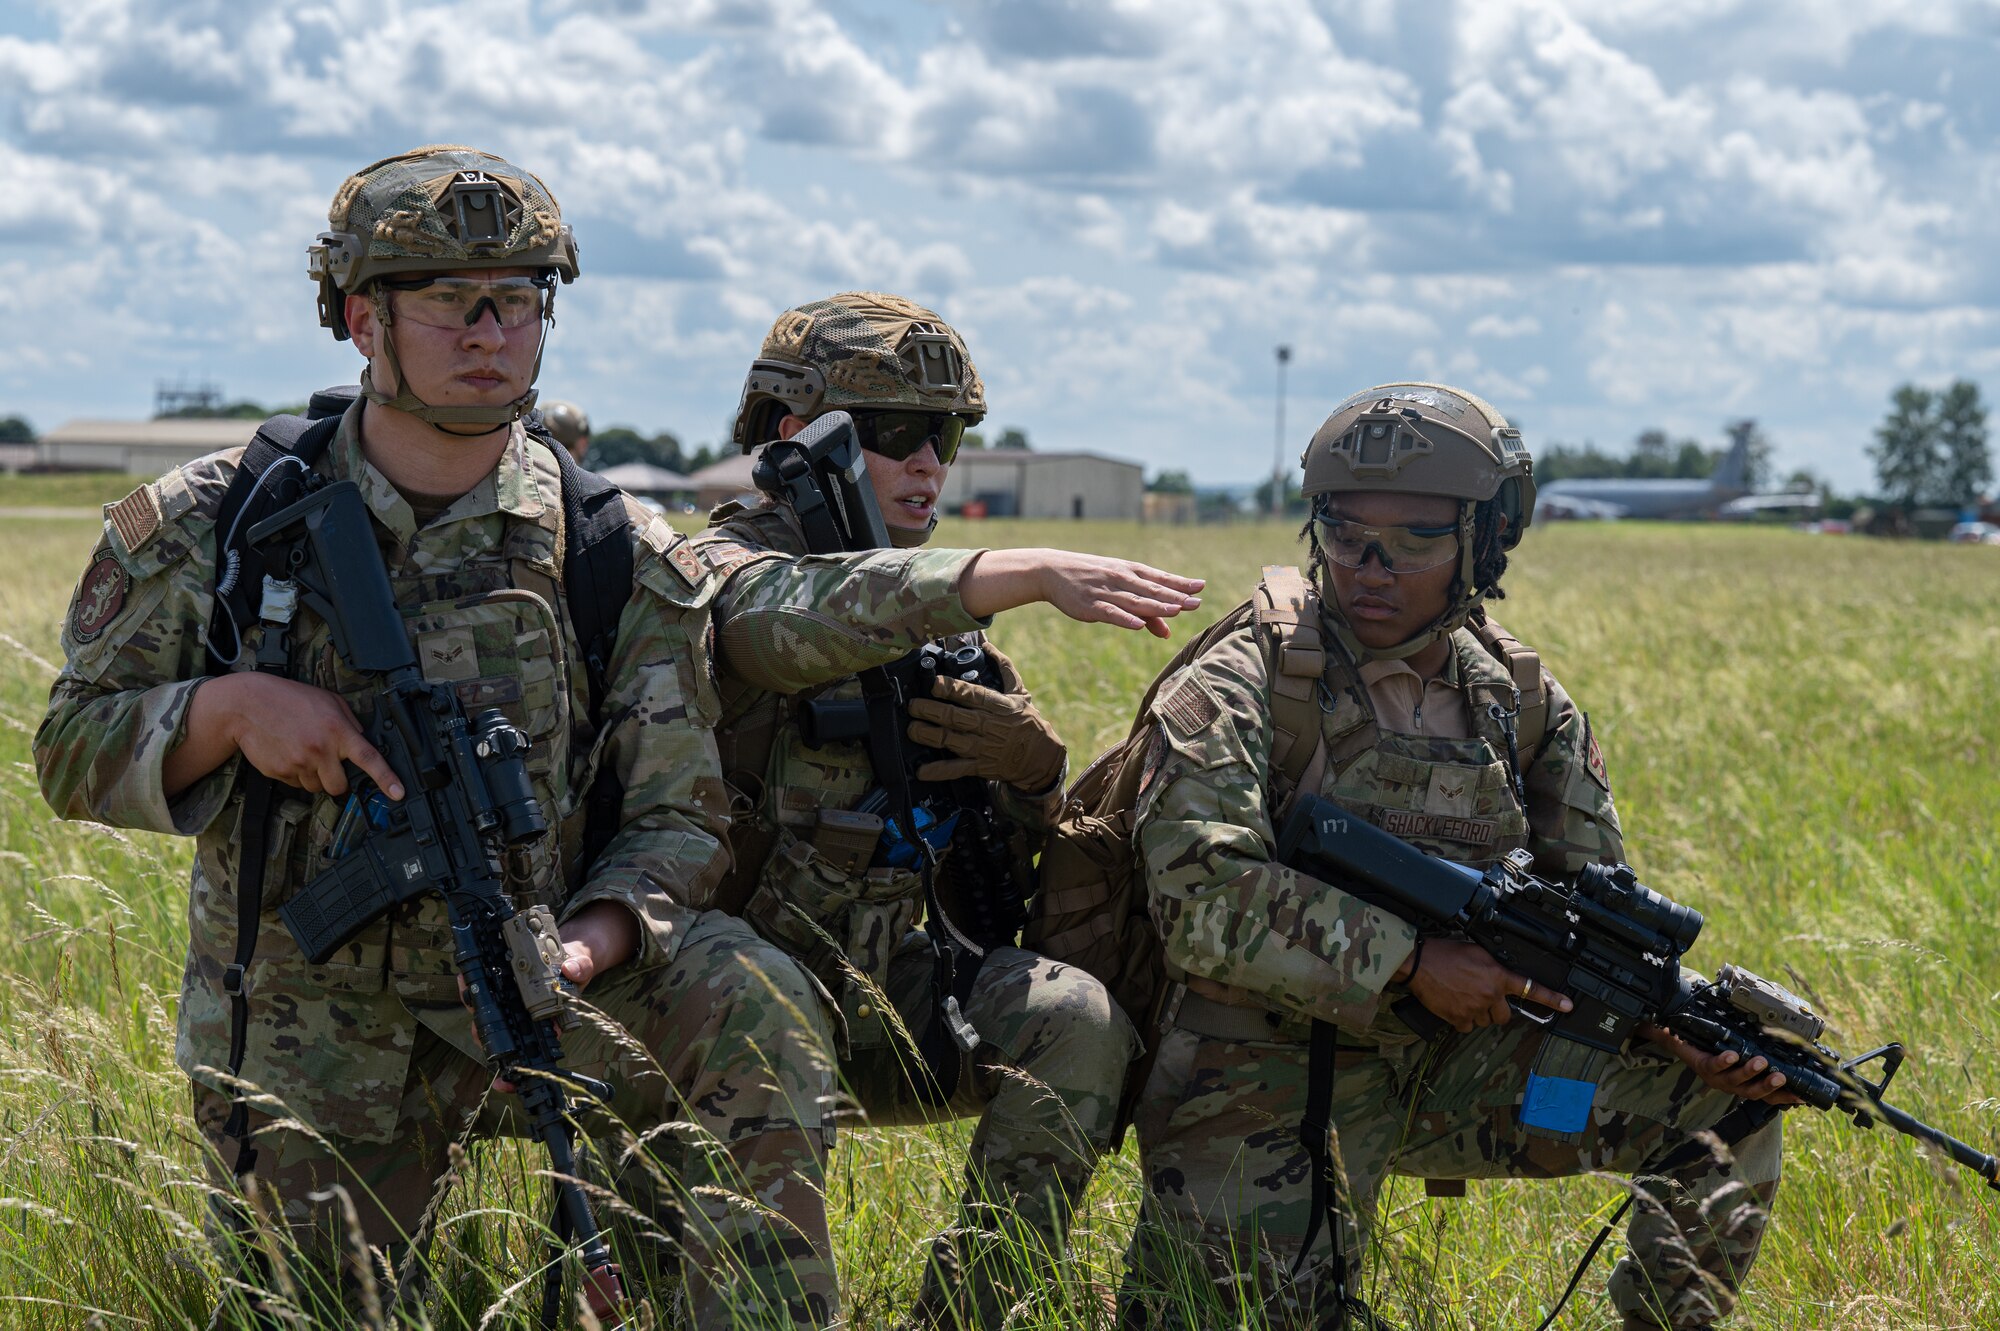 U.S. Air Force Airmen assigned to the 100th Security Forces Squadron, receive instruction from a fire team leader during a training exercise at Royal Air Force Mildenhall, England, June 21, 2023.